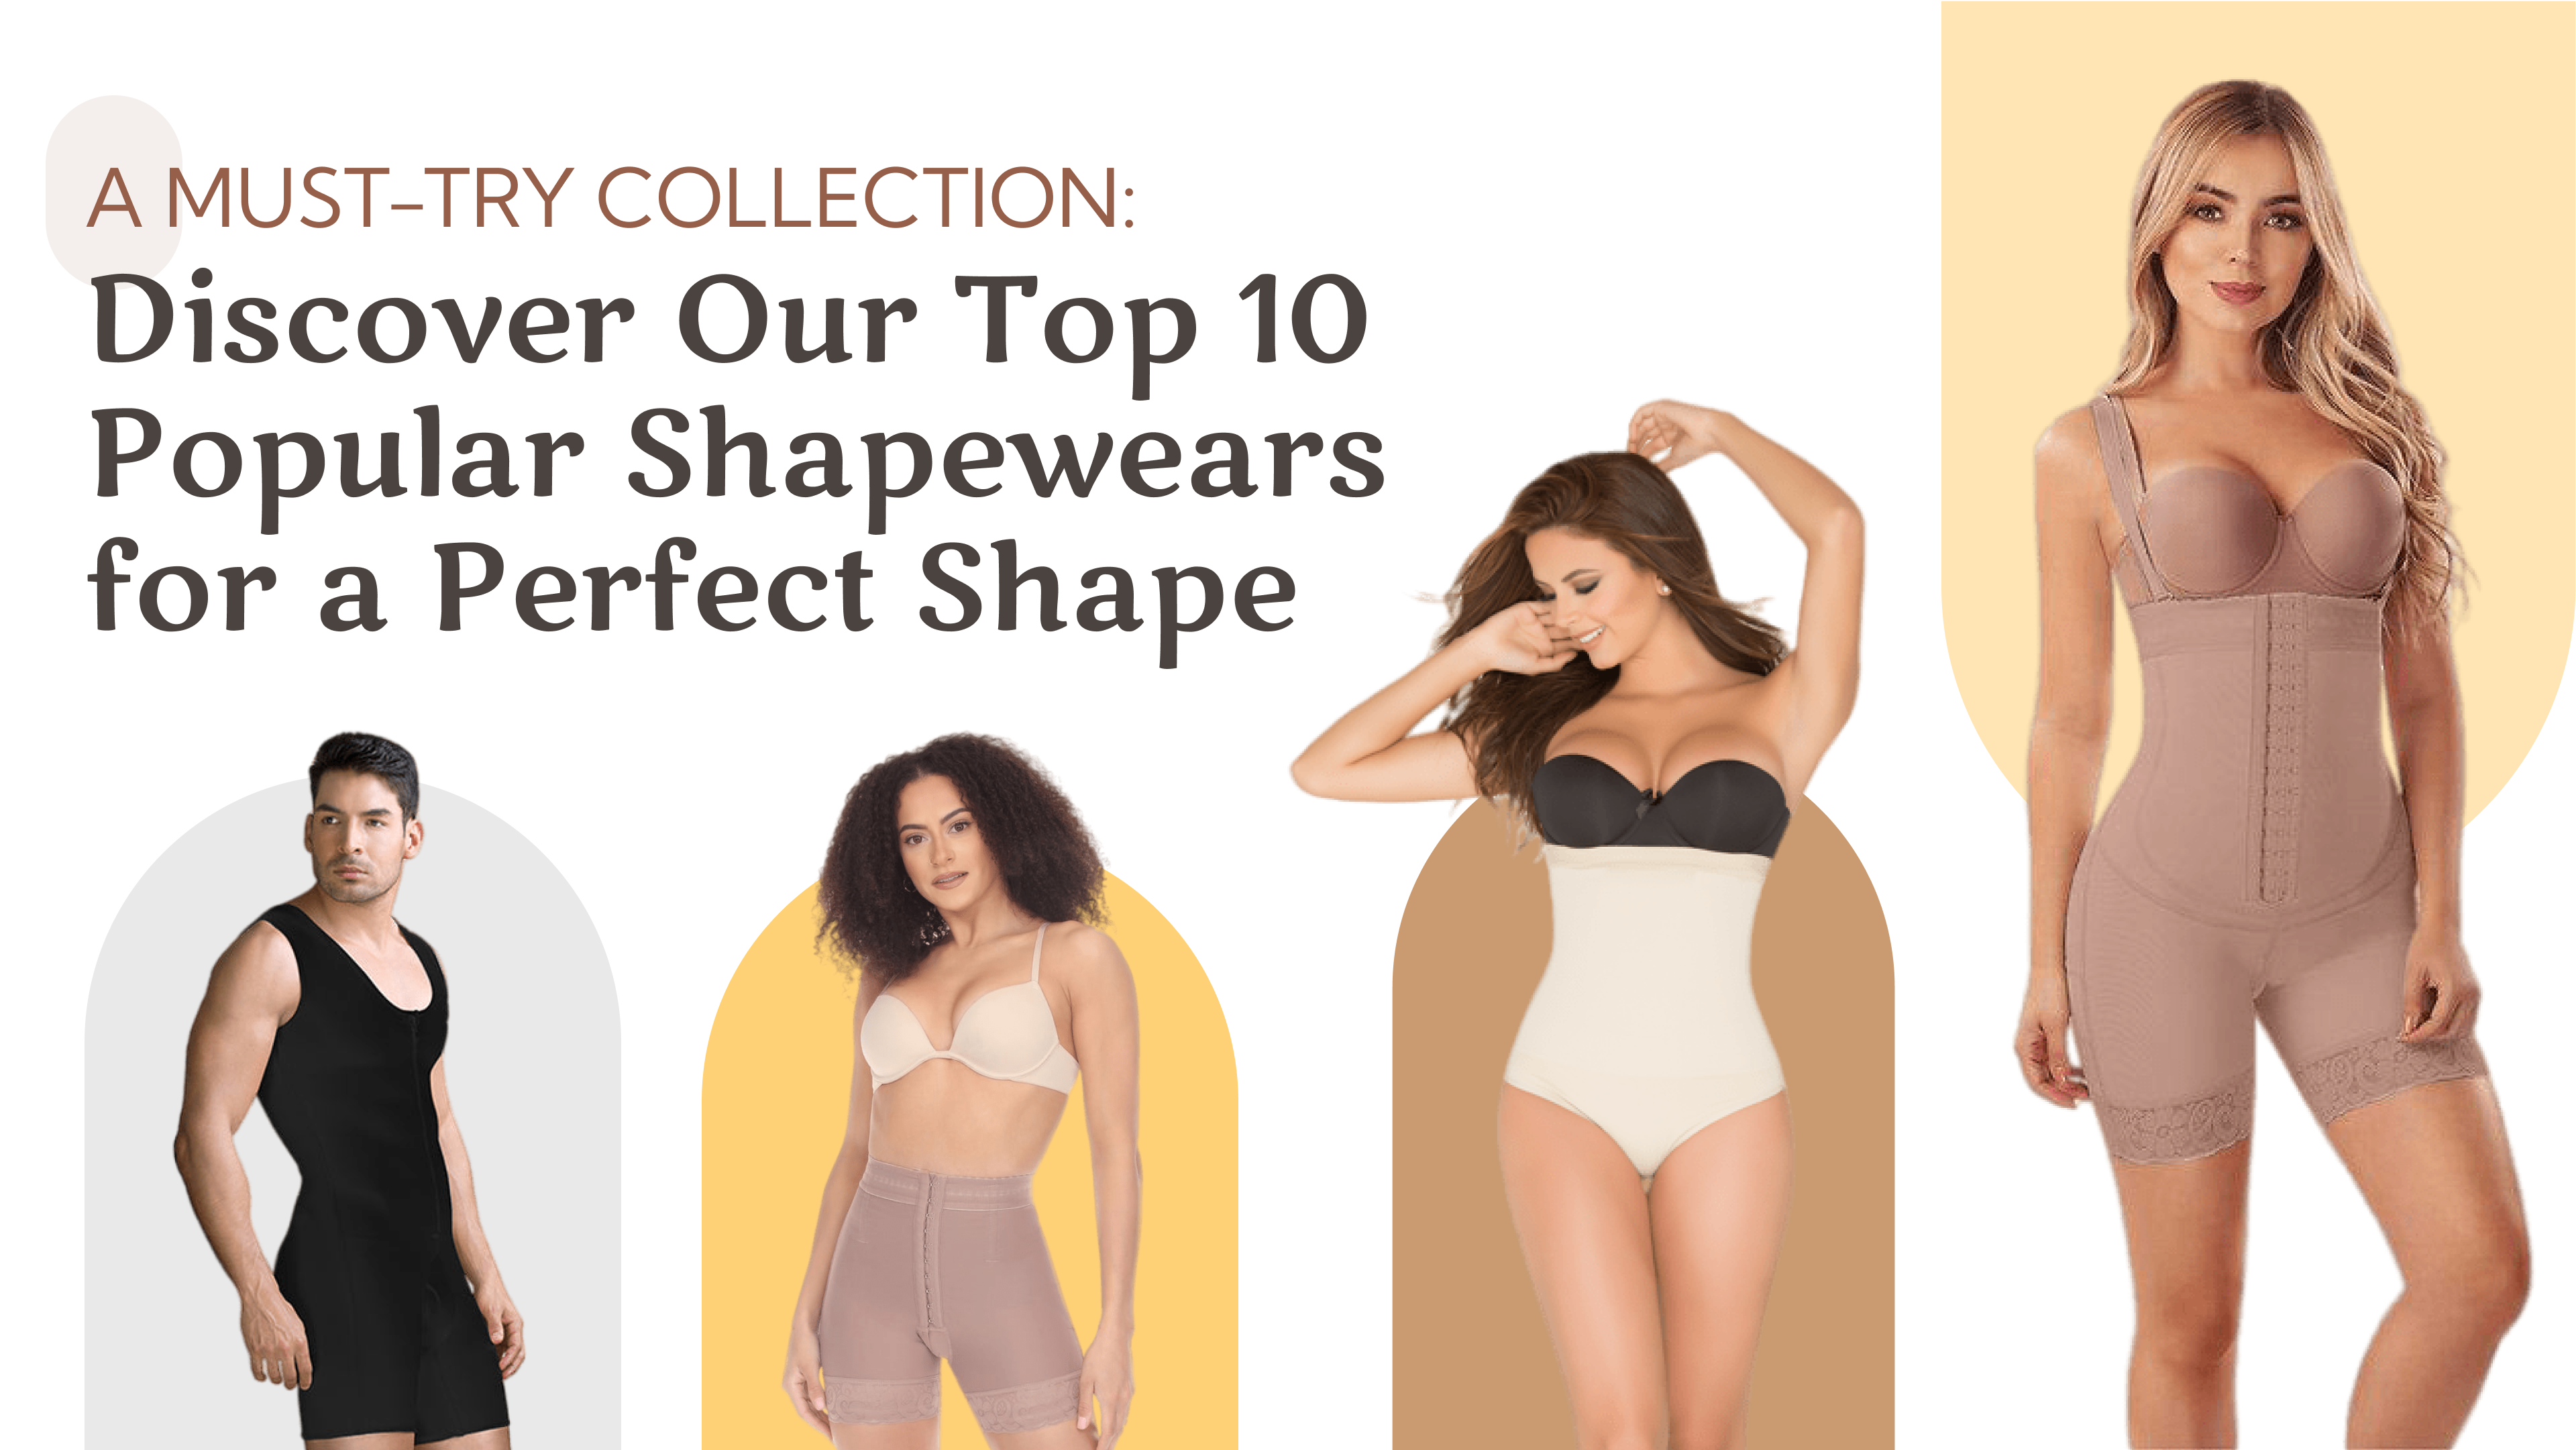 A Must-Try Collection: Discover Our Top 10 Popular Shapewears for a Perfect Shape